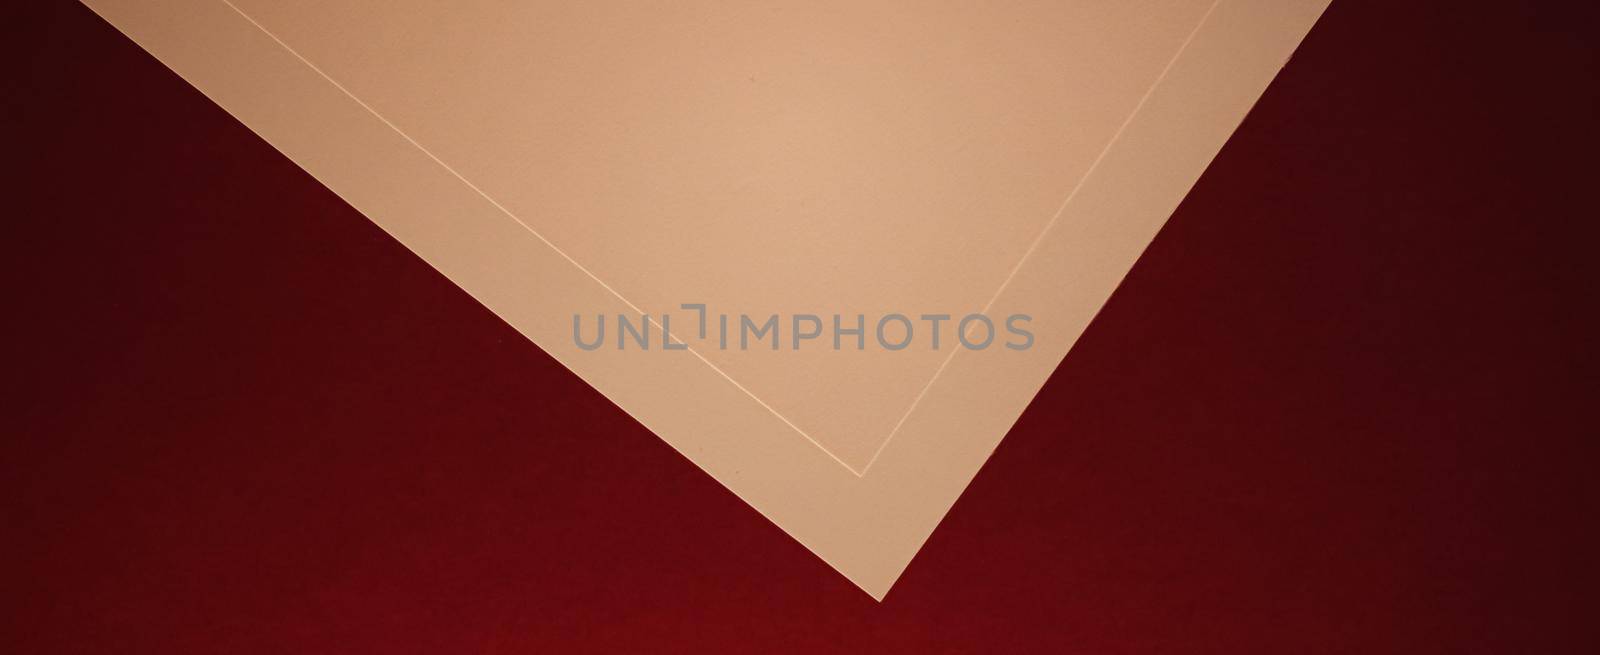 Blank A4 paper, beige on dark red background as office stationery flatlay, luxury branding flat lay and brand identity design for mockup by Anneleven